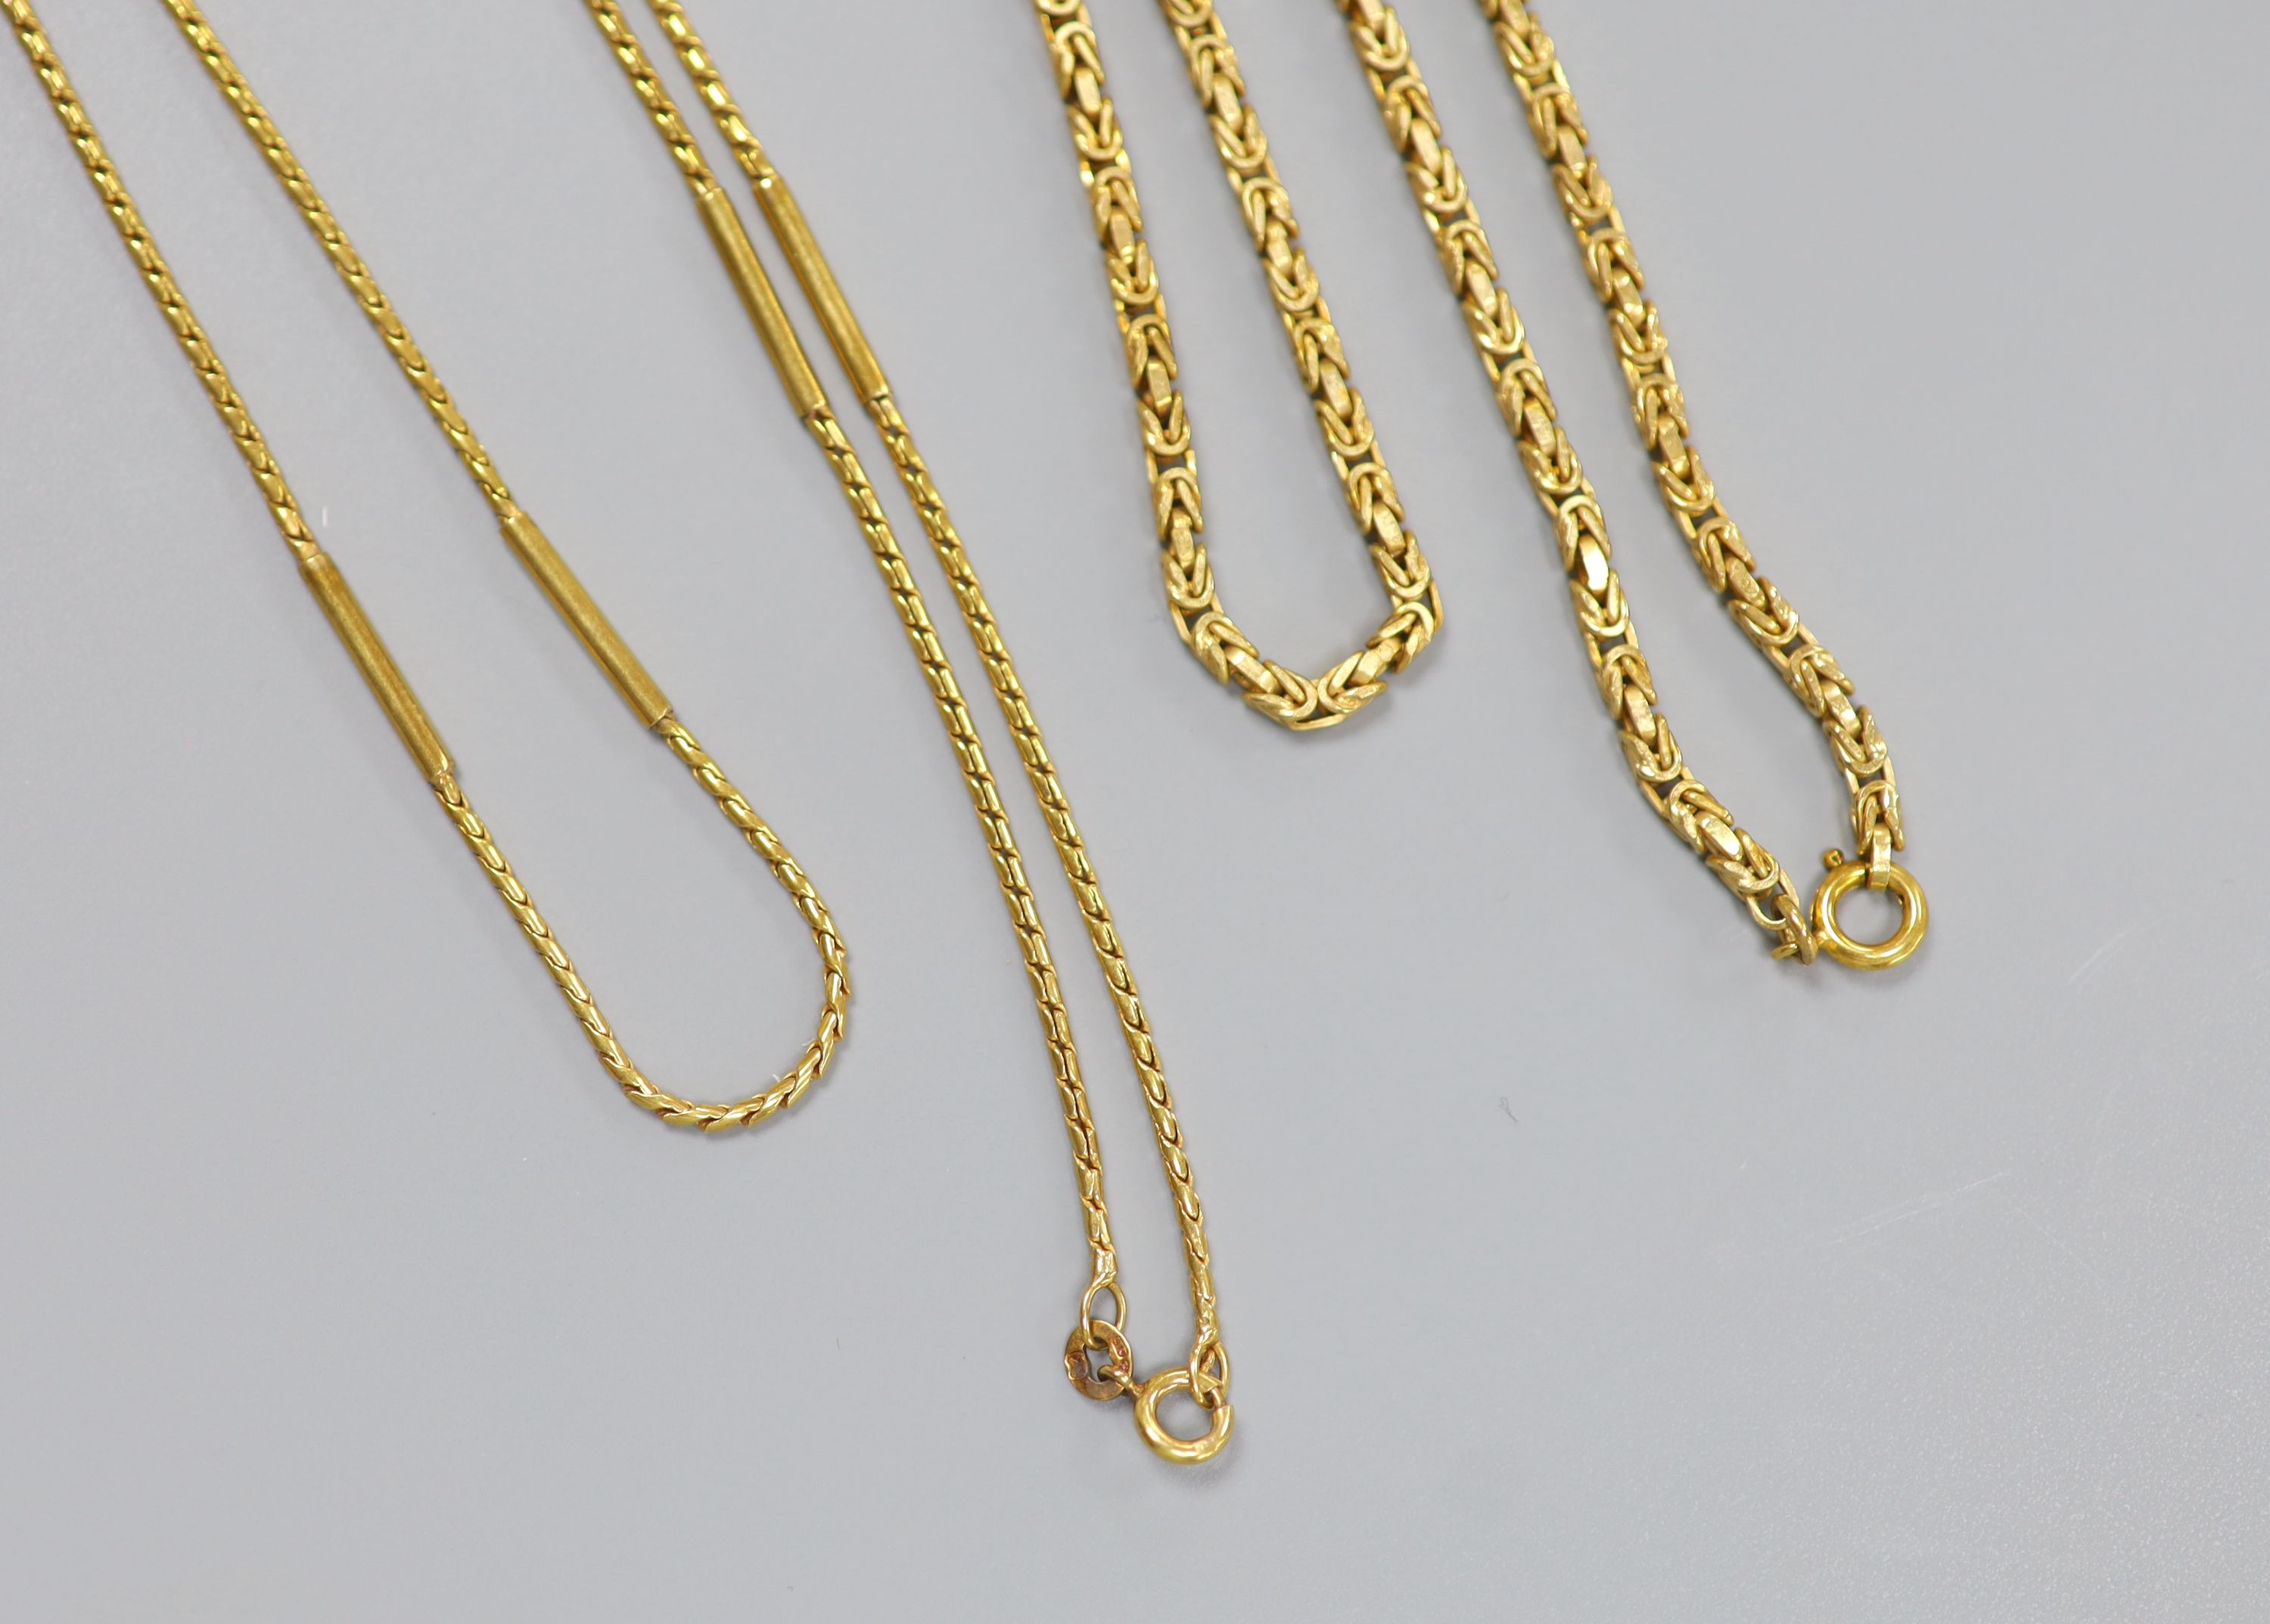 Two modern 9ct gold chains, 80cm & 42cm